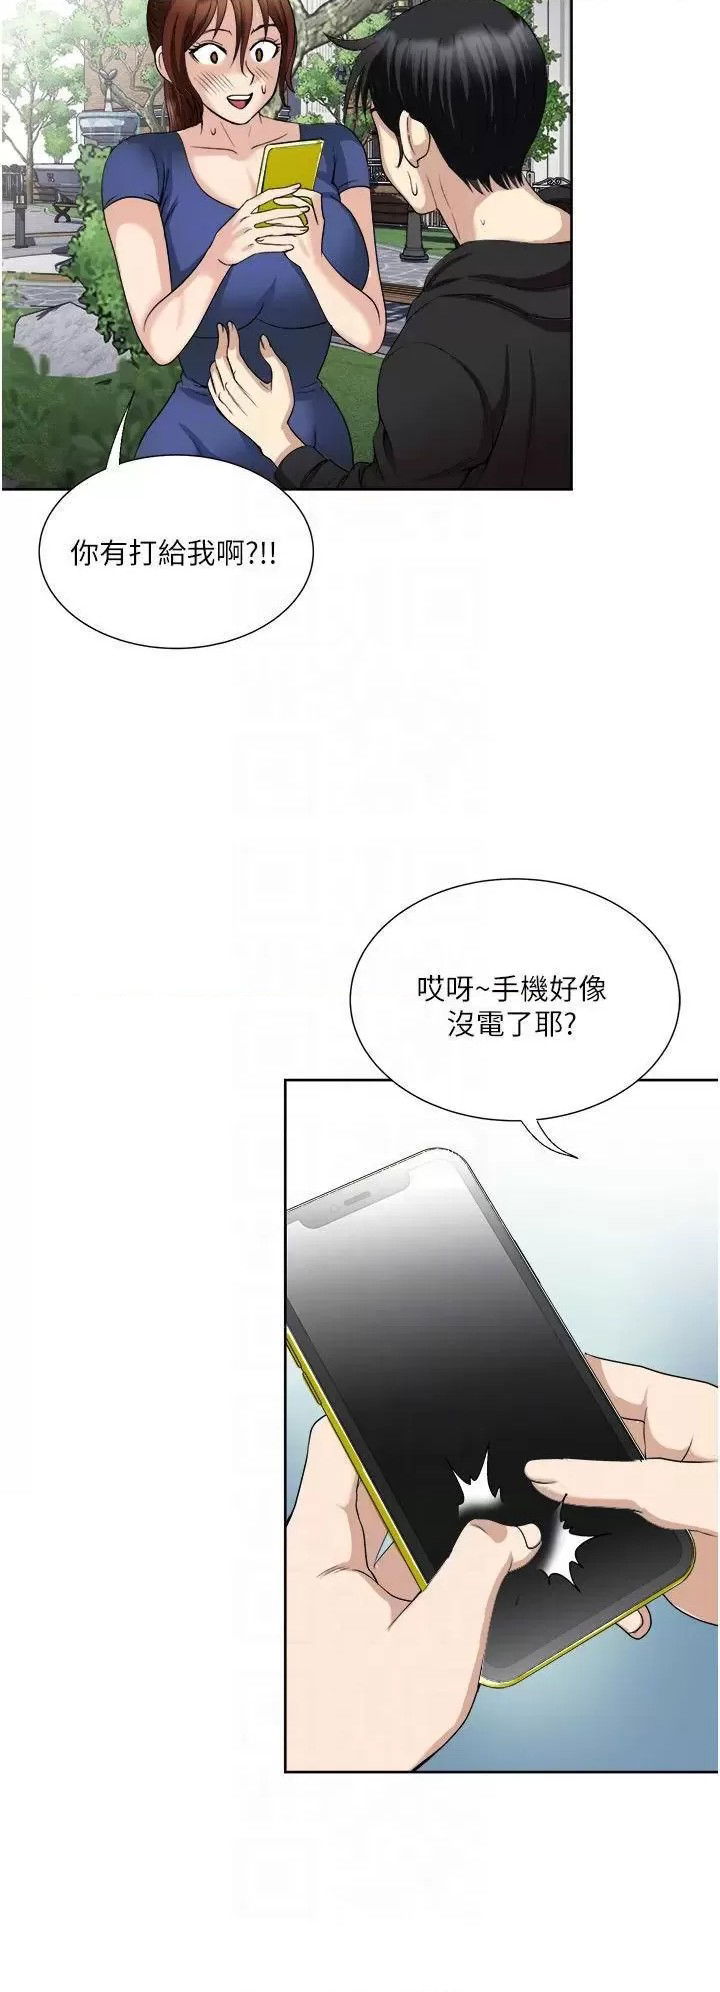 just-once-raw-chap-25-11